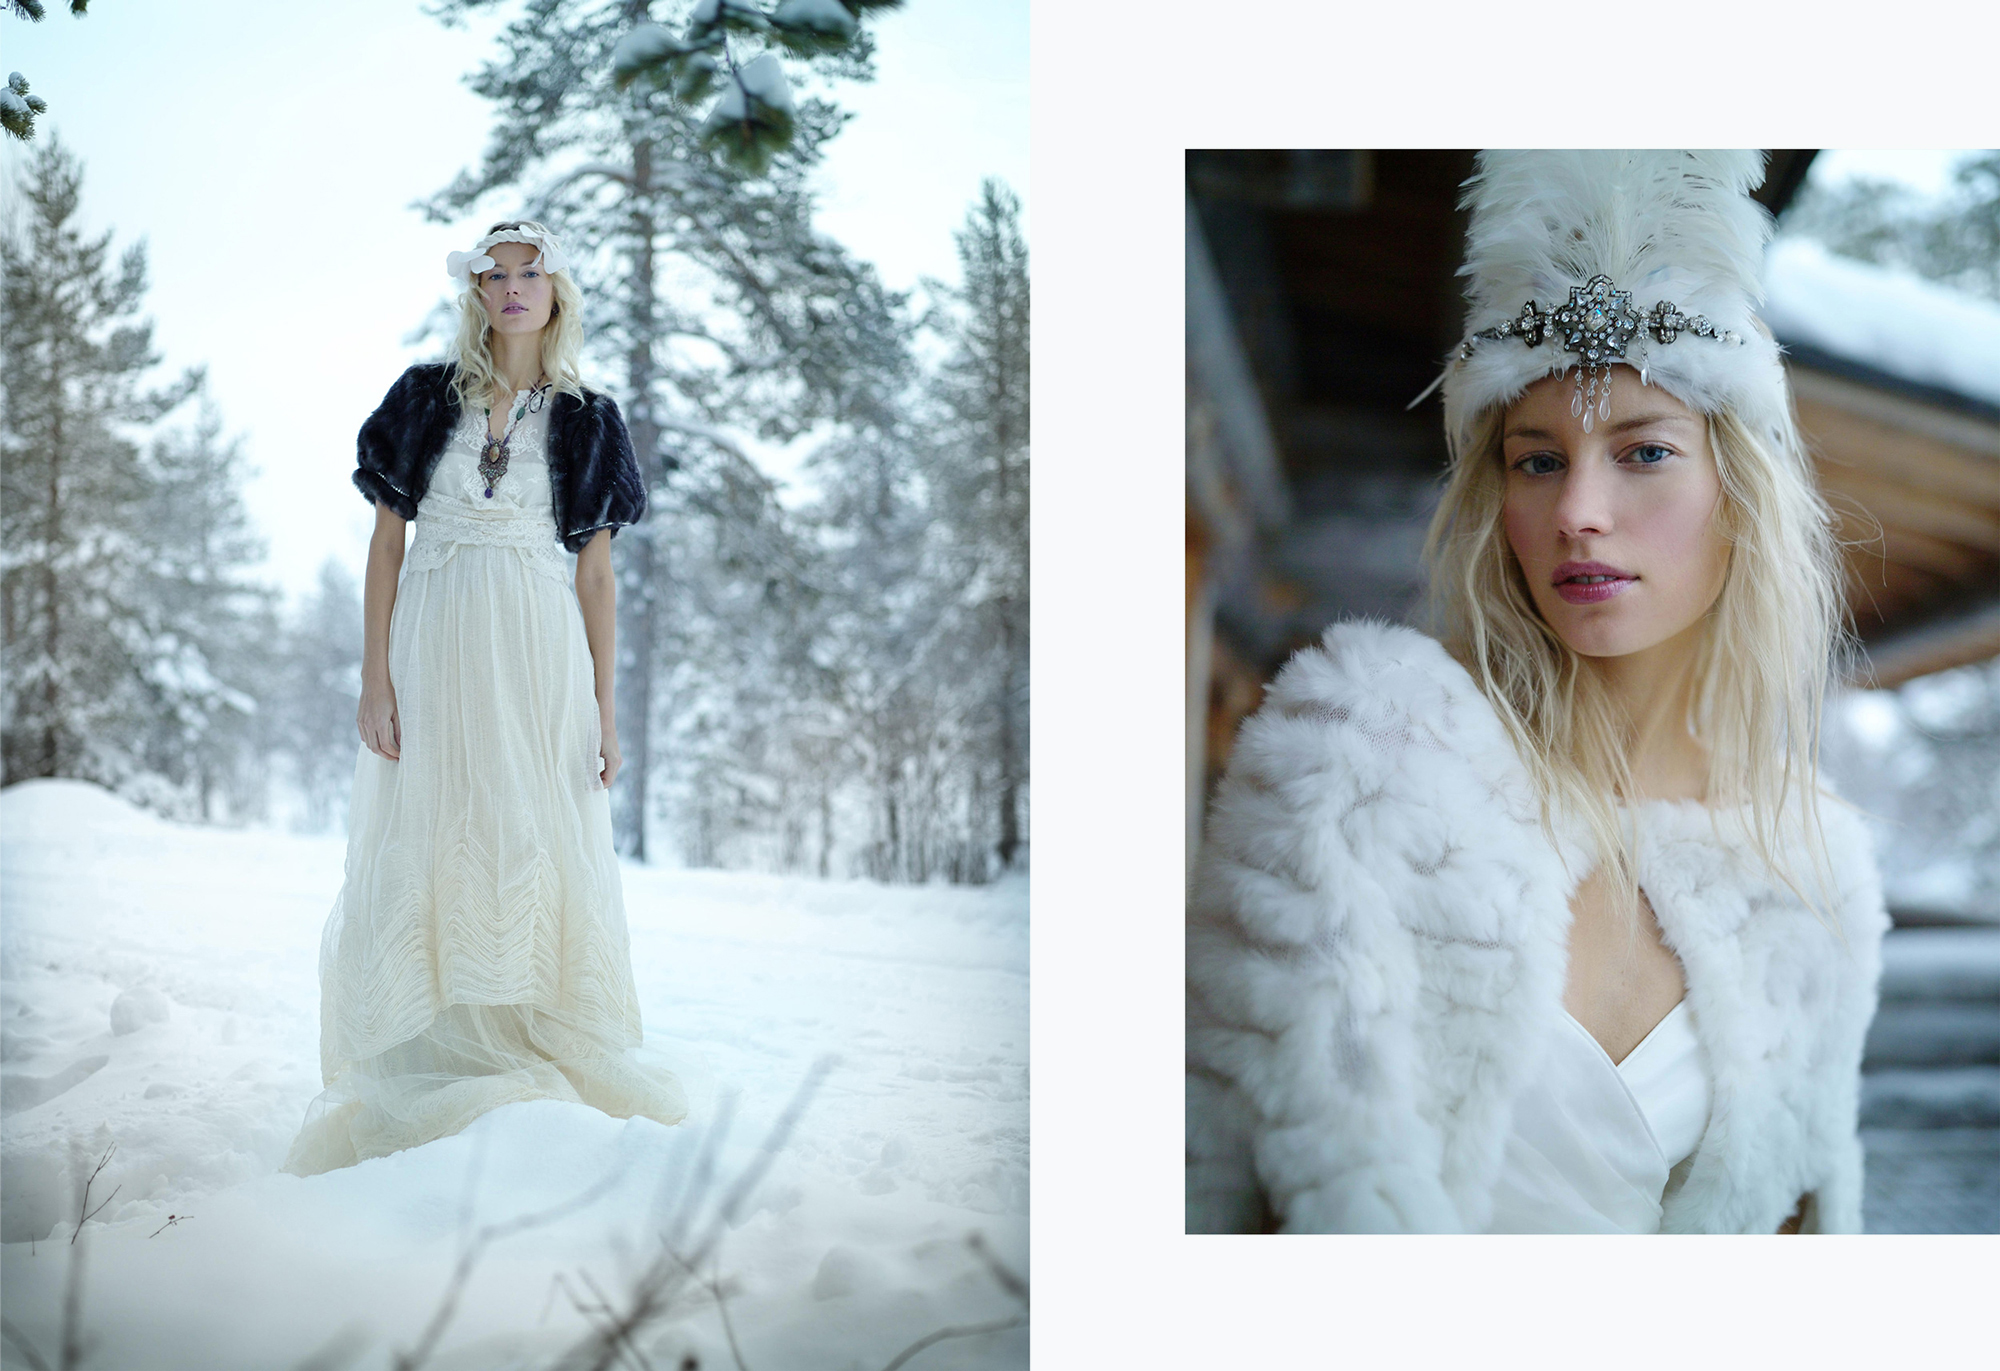 blond finnish model in he snow tlapland wearing white long bridal ball dress and winter fur coat with forest in the background